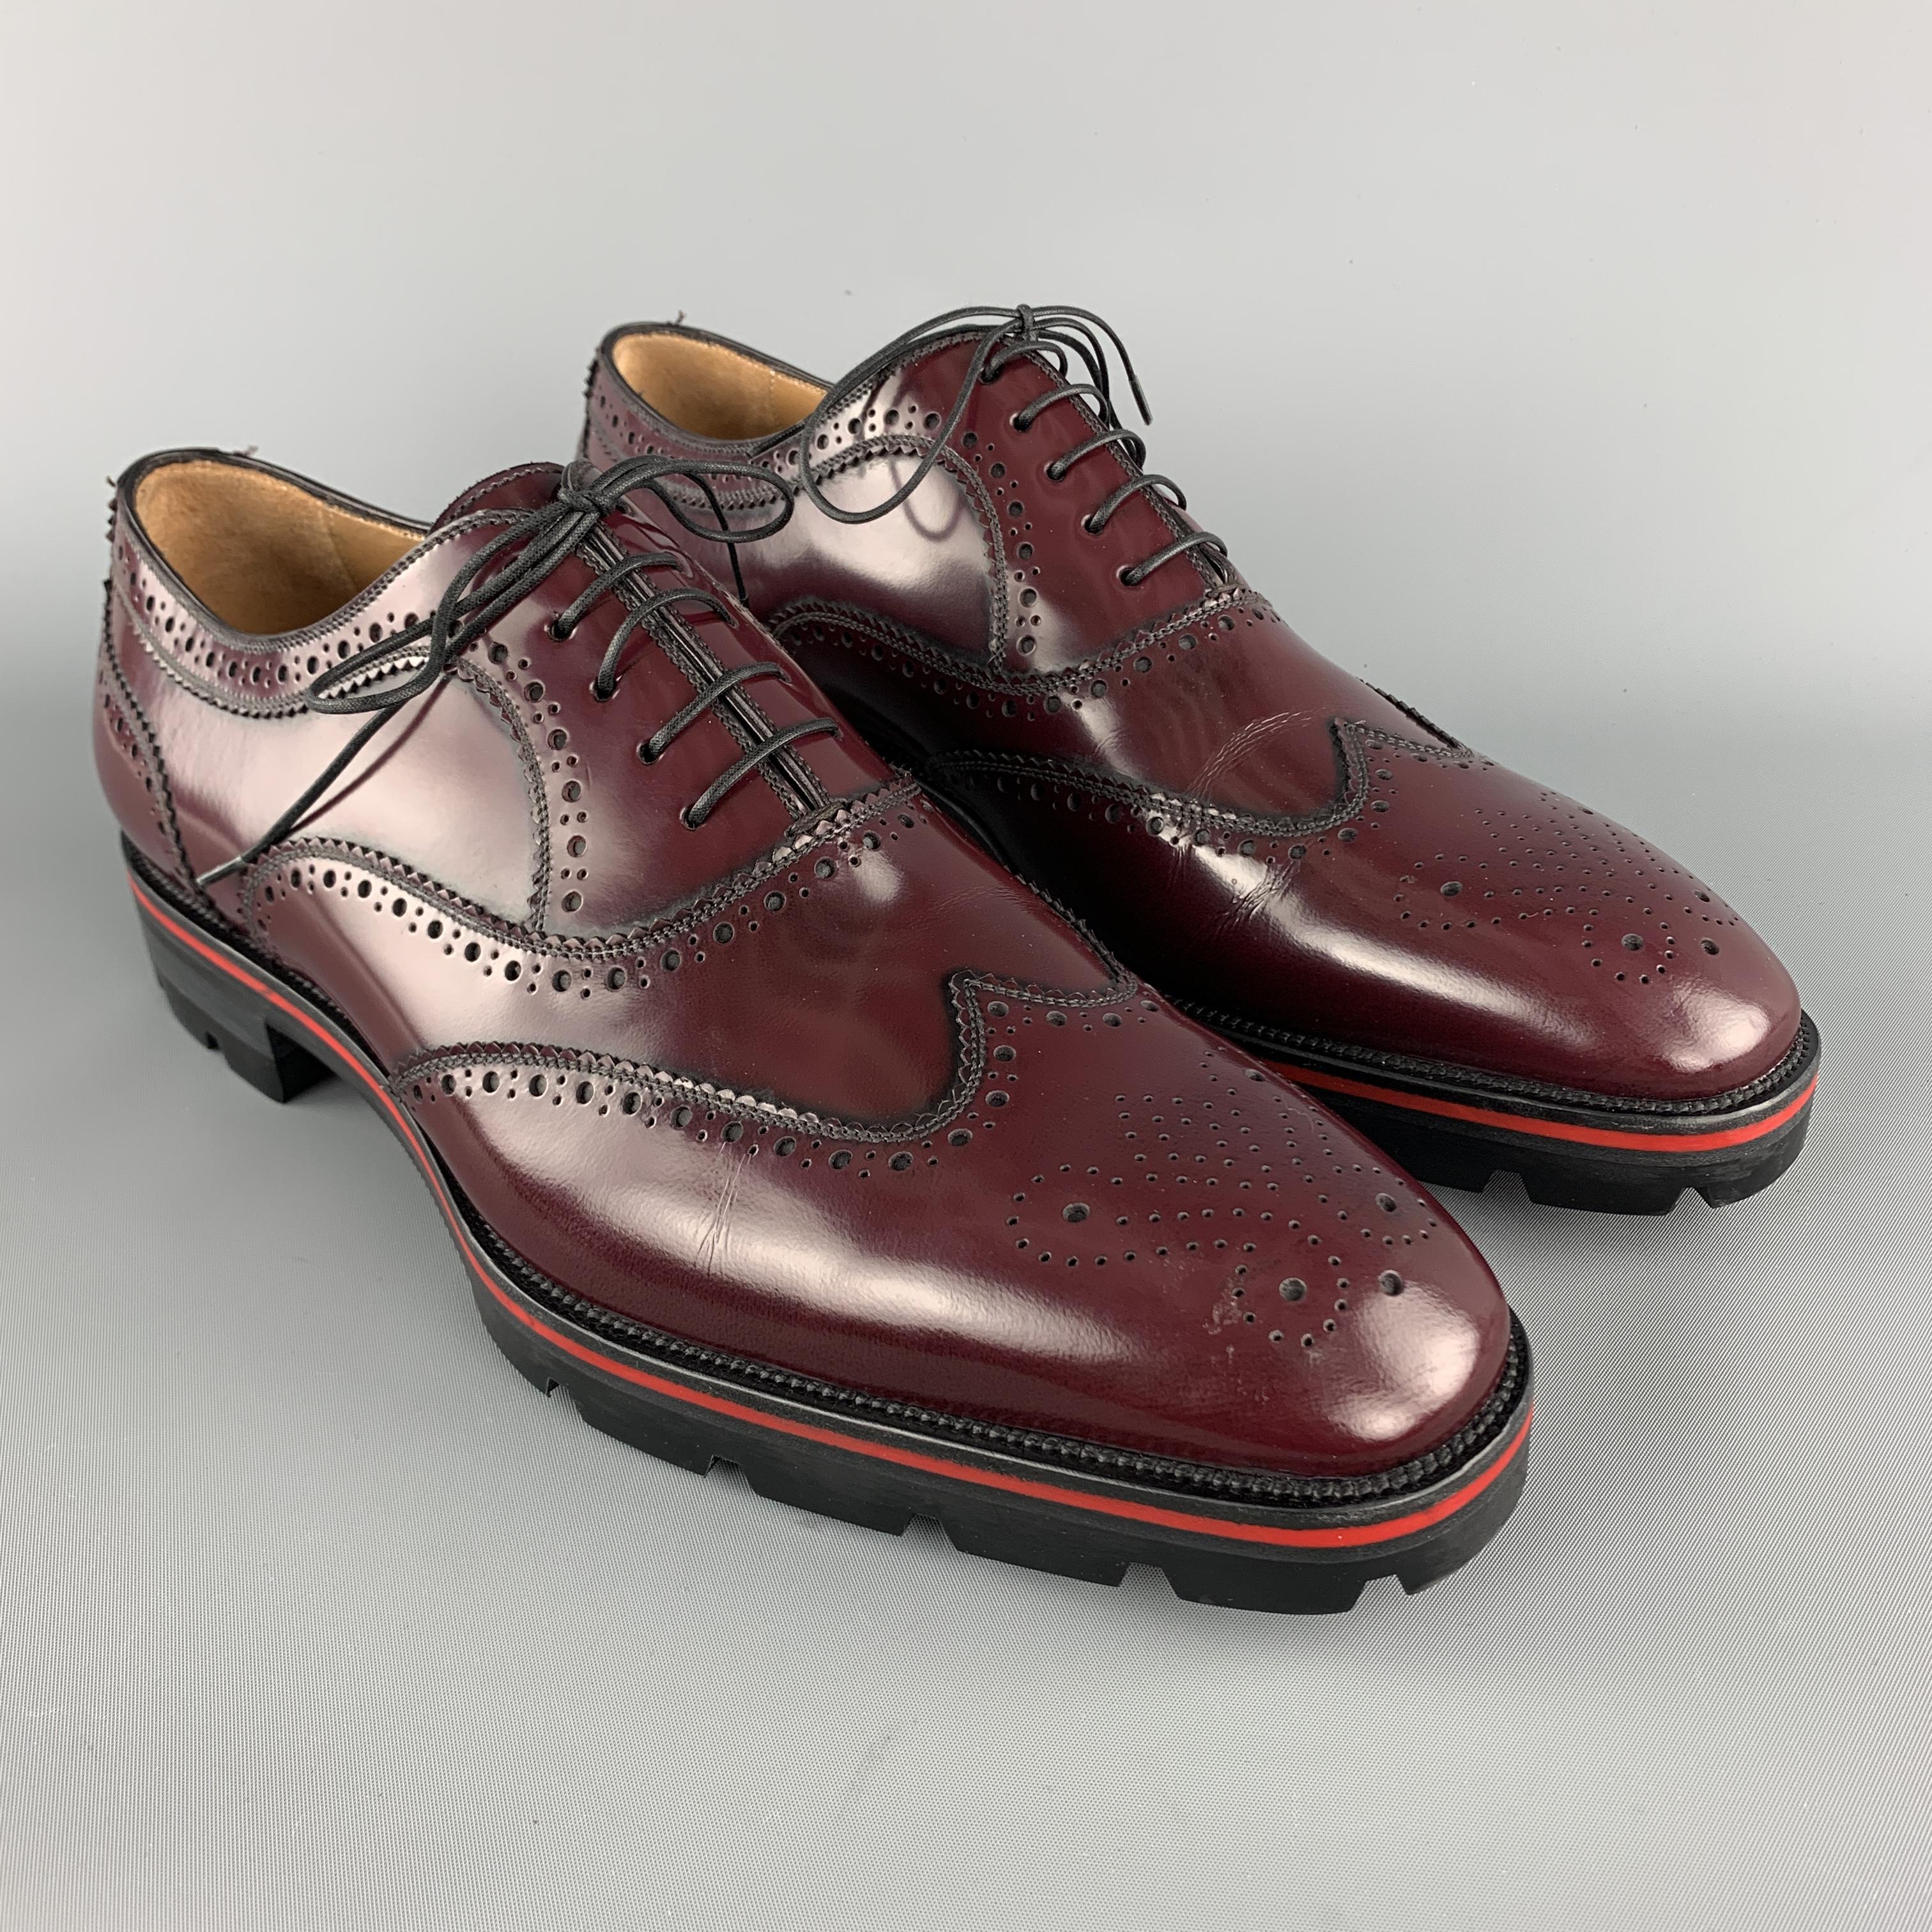 CHRISTIAN LOUBOUTIN oxford lace up shoes comes in burgundy tones in leather material, featuring an antique style, a wingtip, a branded leather insole and a rubber red outsole.  Made in Italy.

Excellent Pre-Owned Condition. 
Marked: EU 45

Outsole: